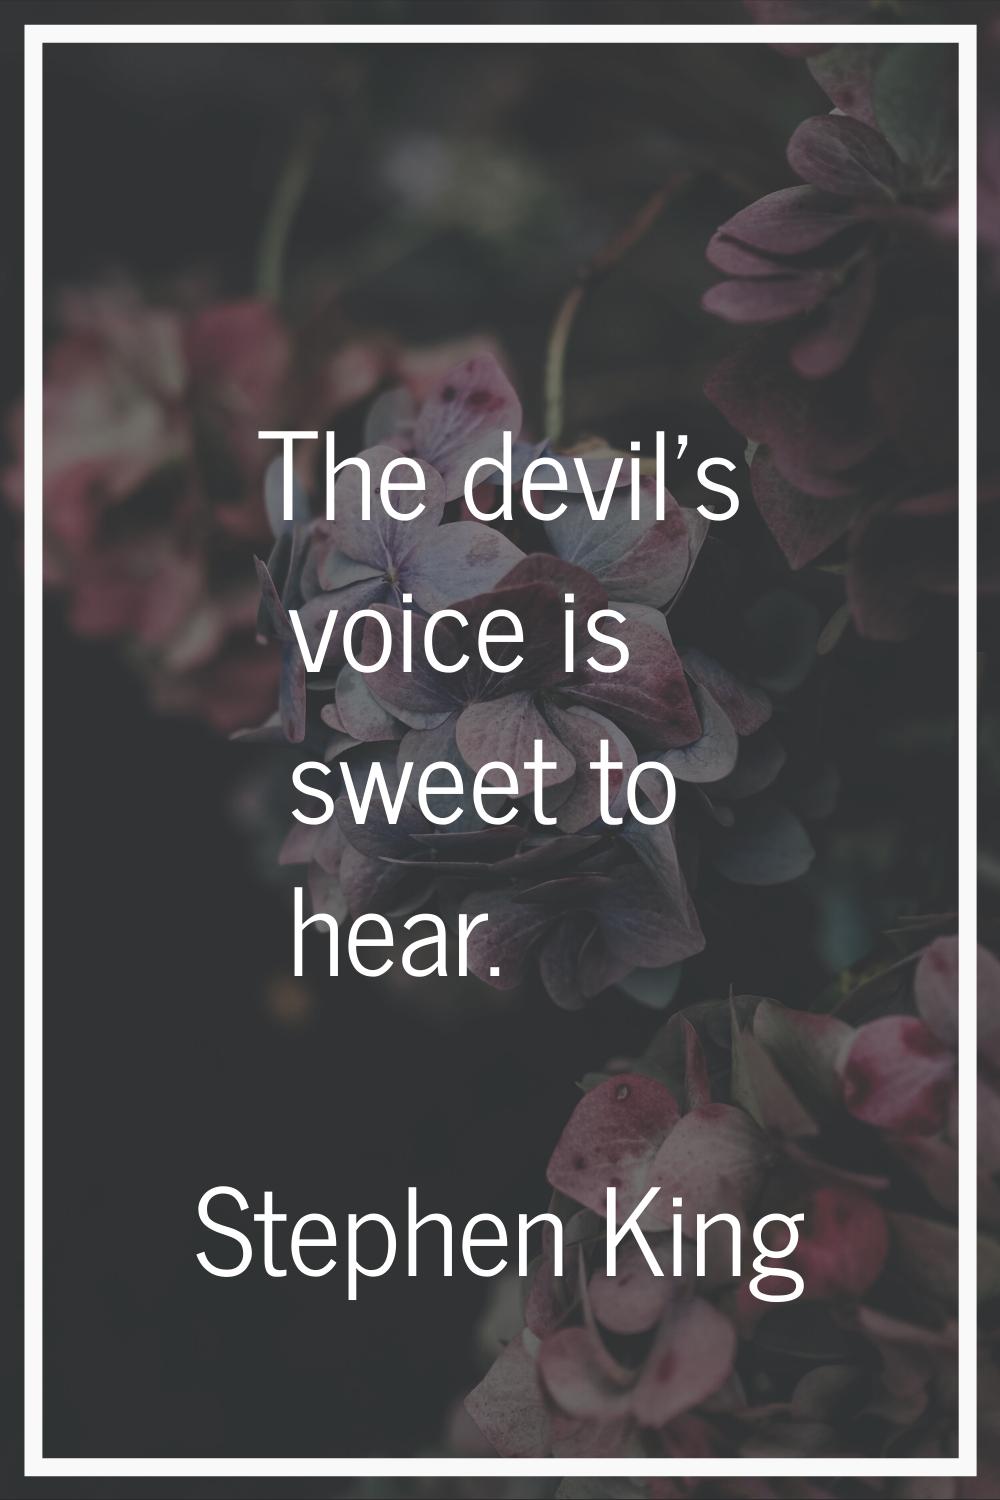 The devil's voice is sweet to hear.